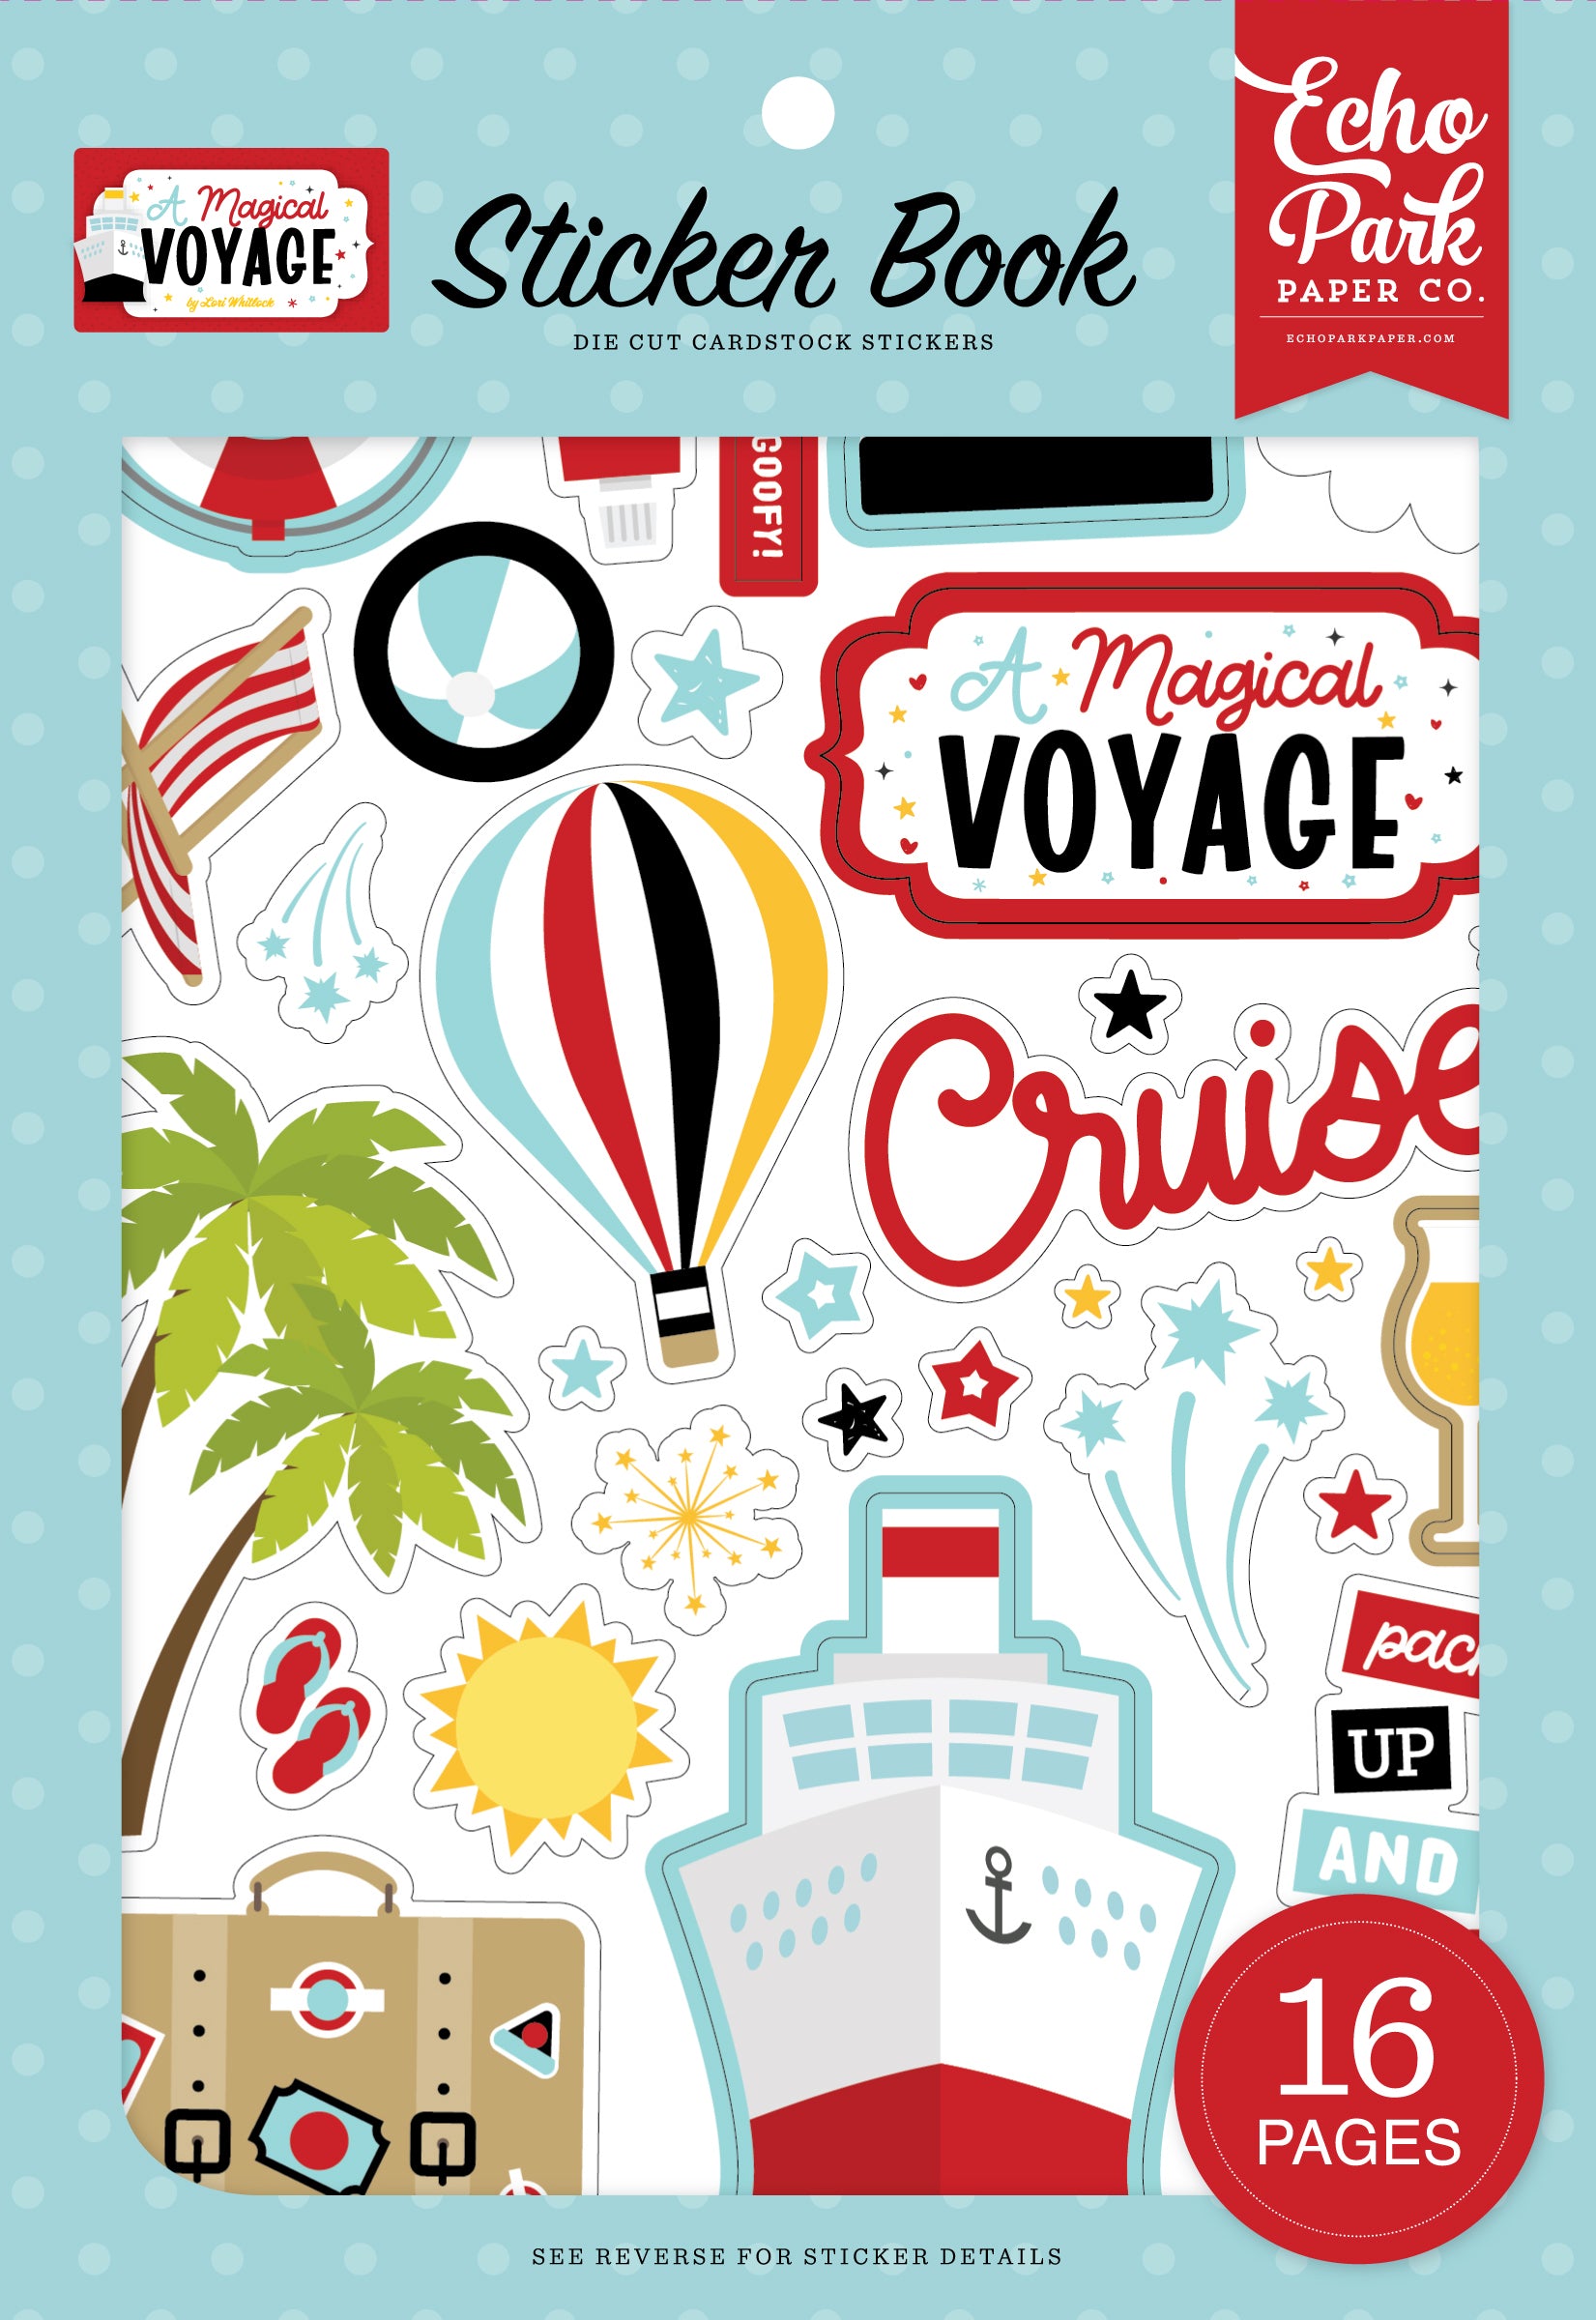 A Magical Voyage Collection Sticker Book by Echo Park Paper